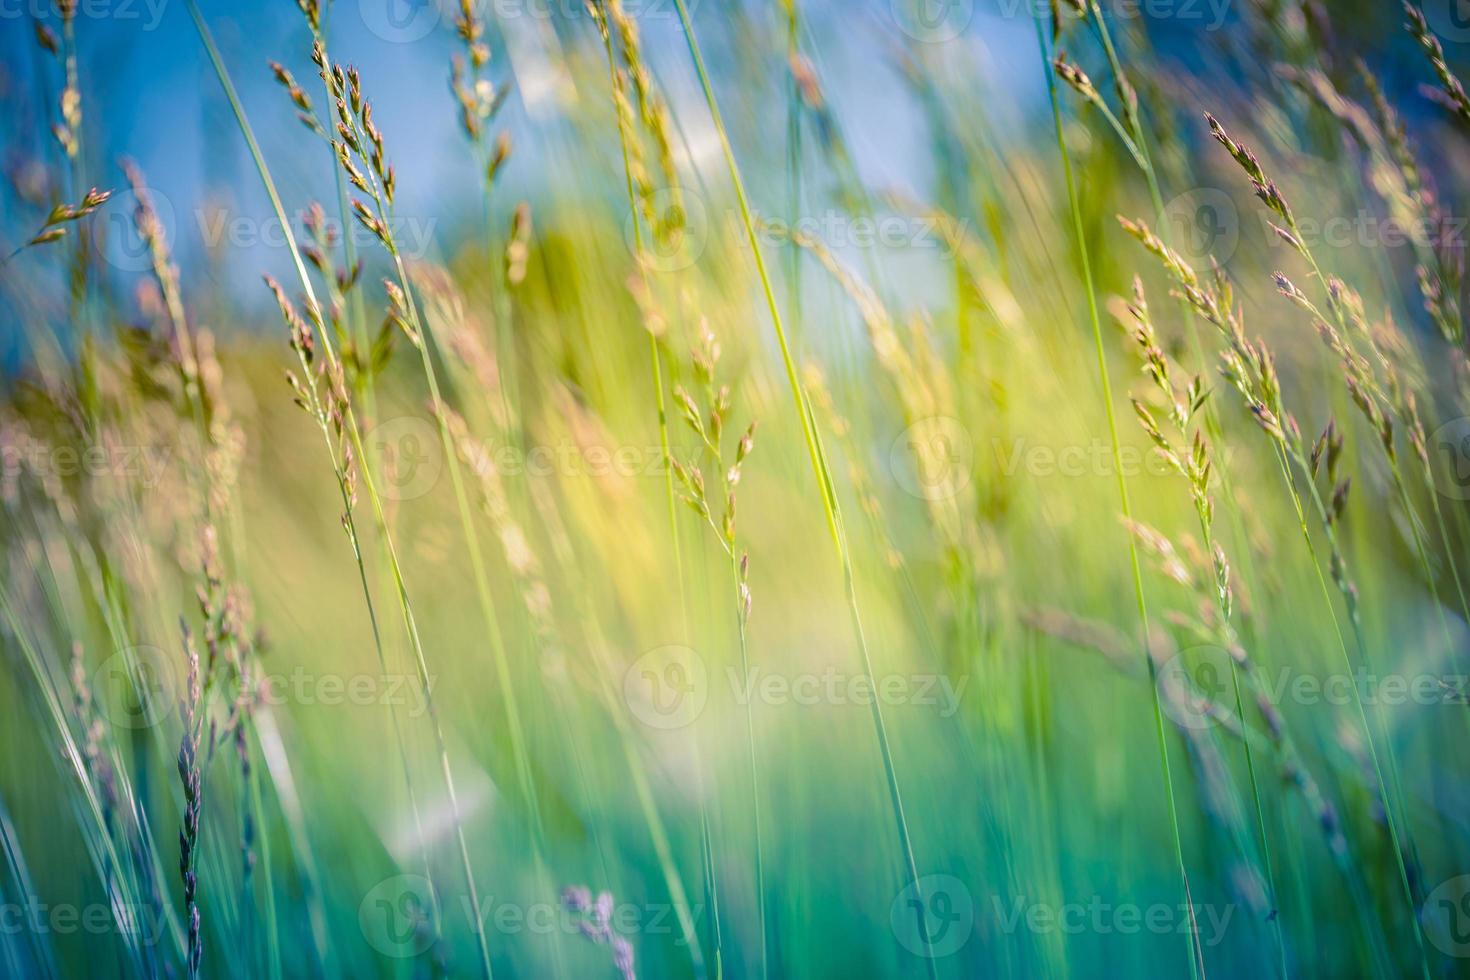 Beautiful close up ecology nature landscape with meadow. Abstract grass background. Abstract natural freshness with beauty blurred bokeh environment. Inspirational nature concept photo